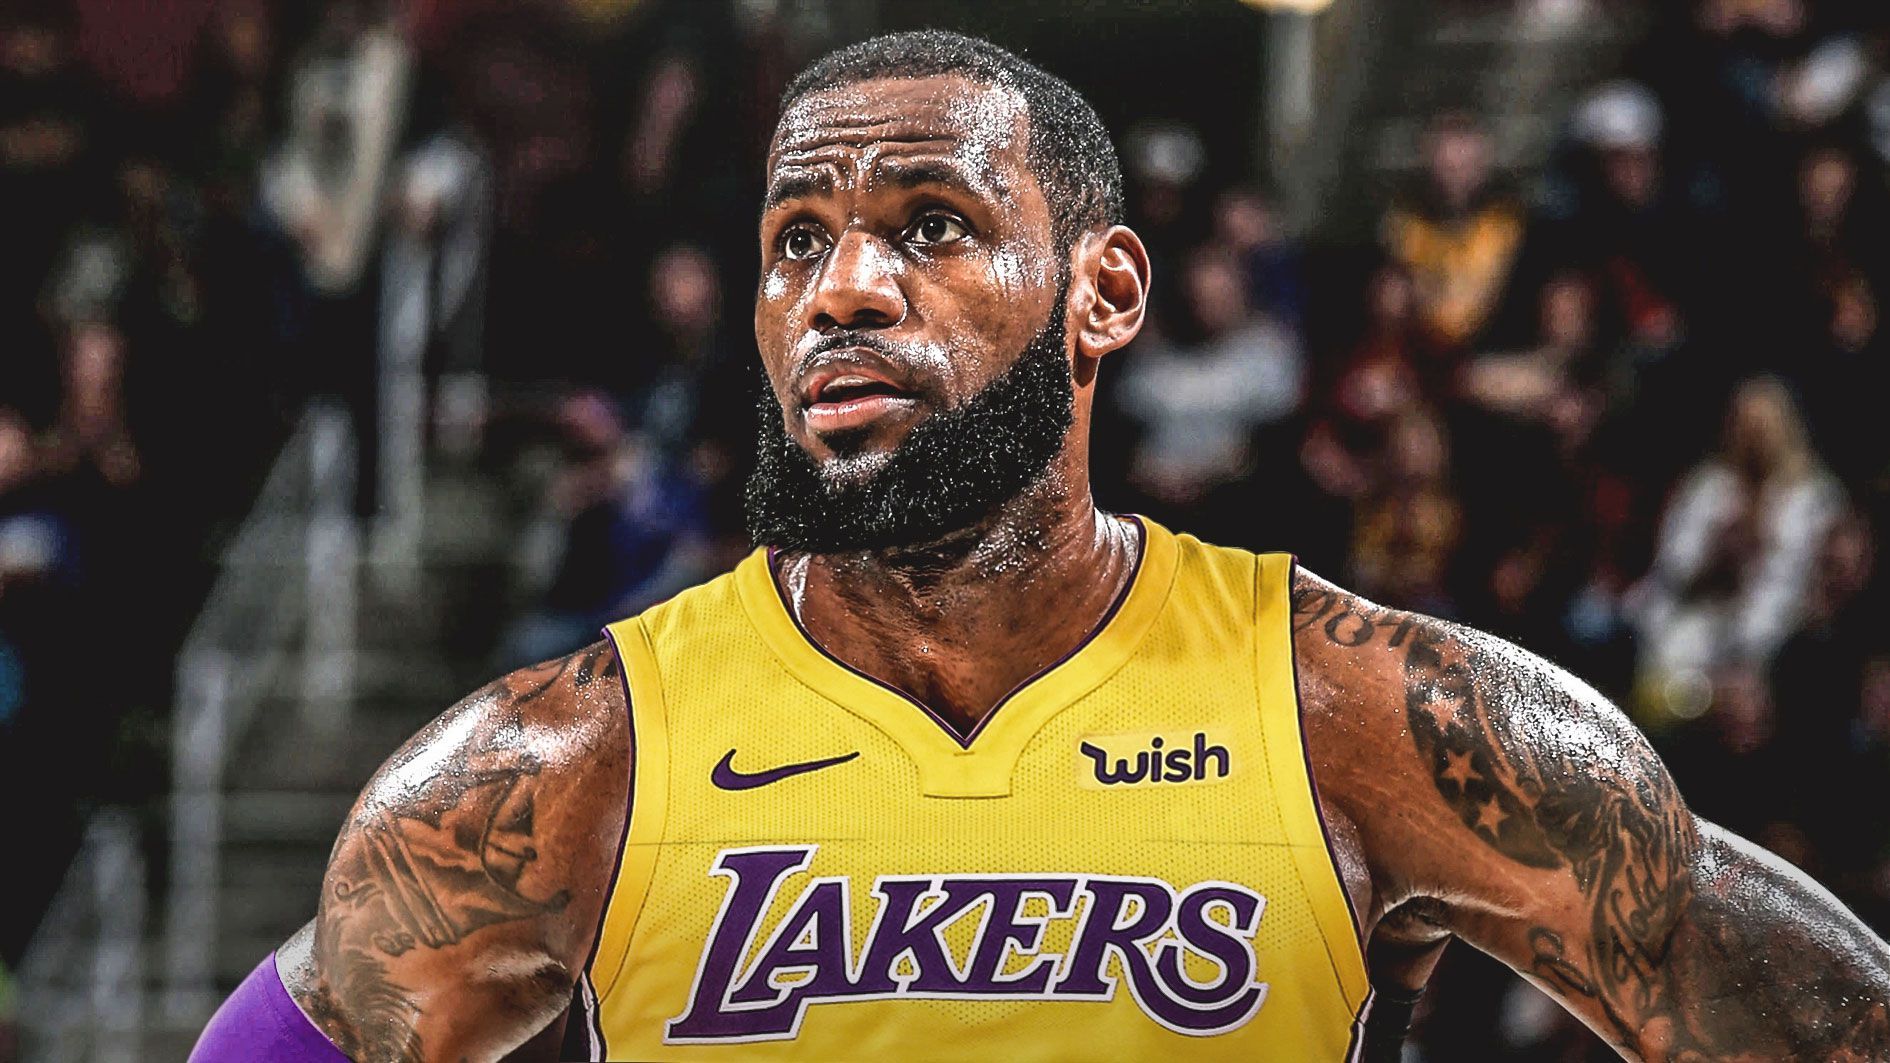 Here's why you should be excited for LeBron at the Lakers